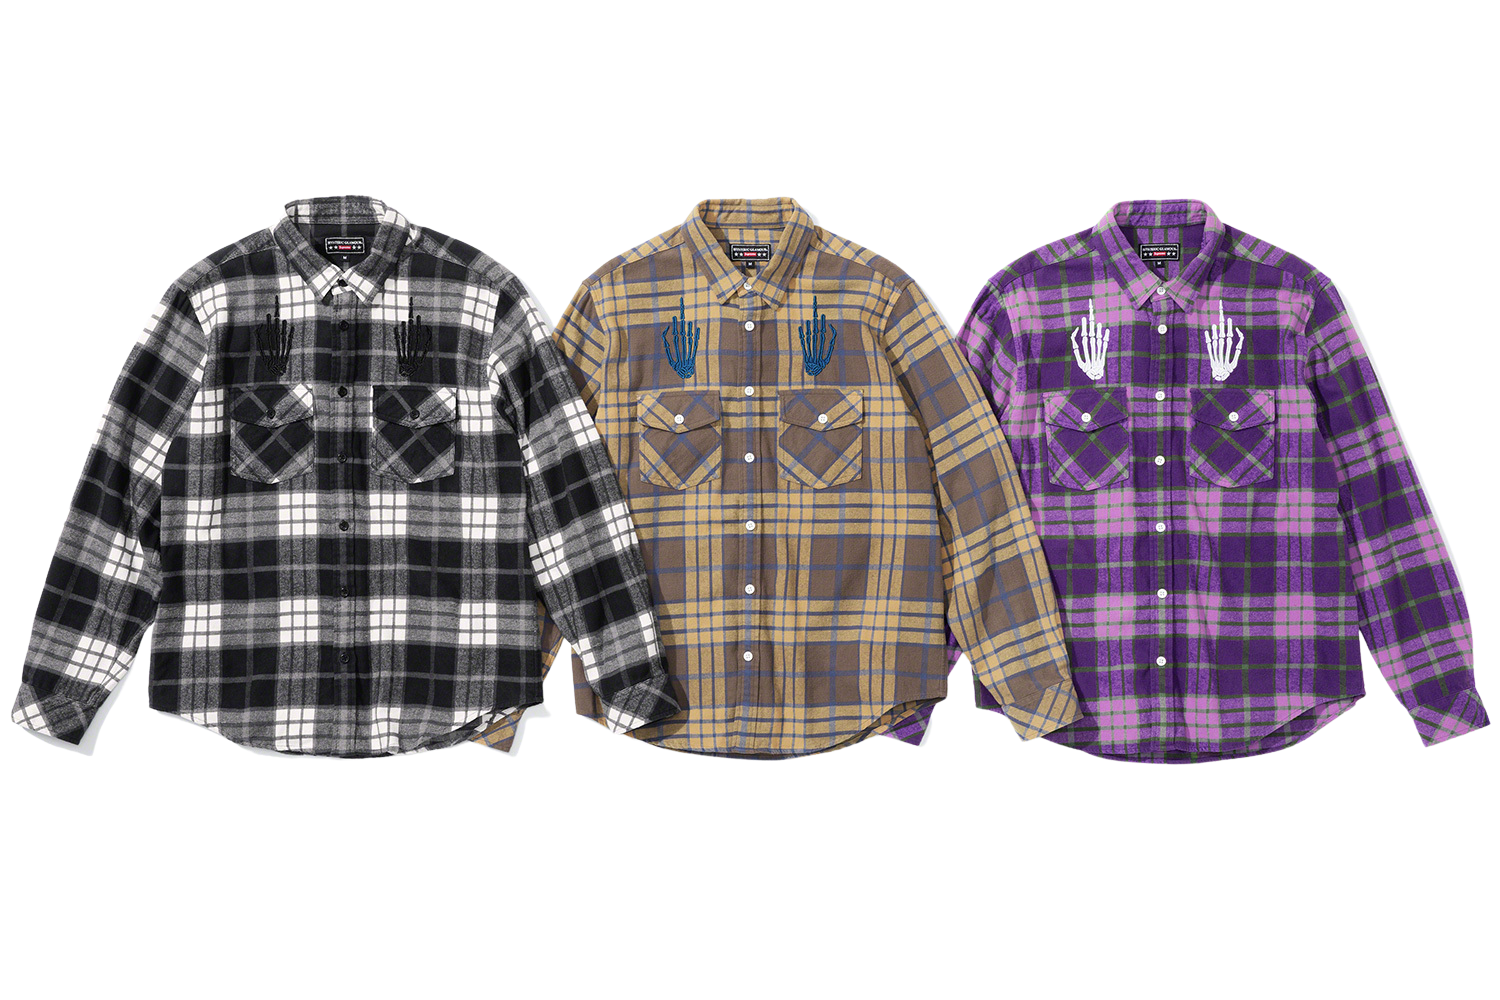 supreme hysteric glamour flannel shirt L